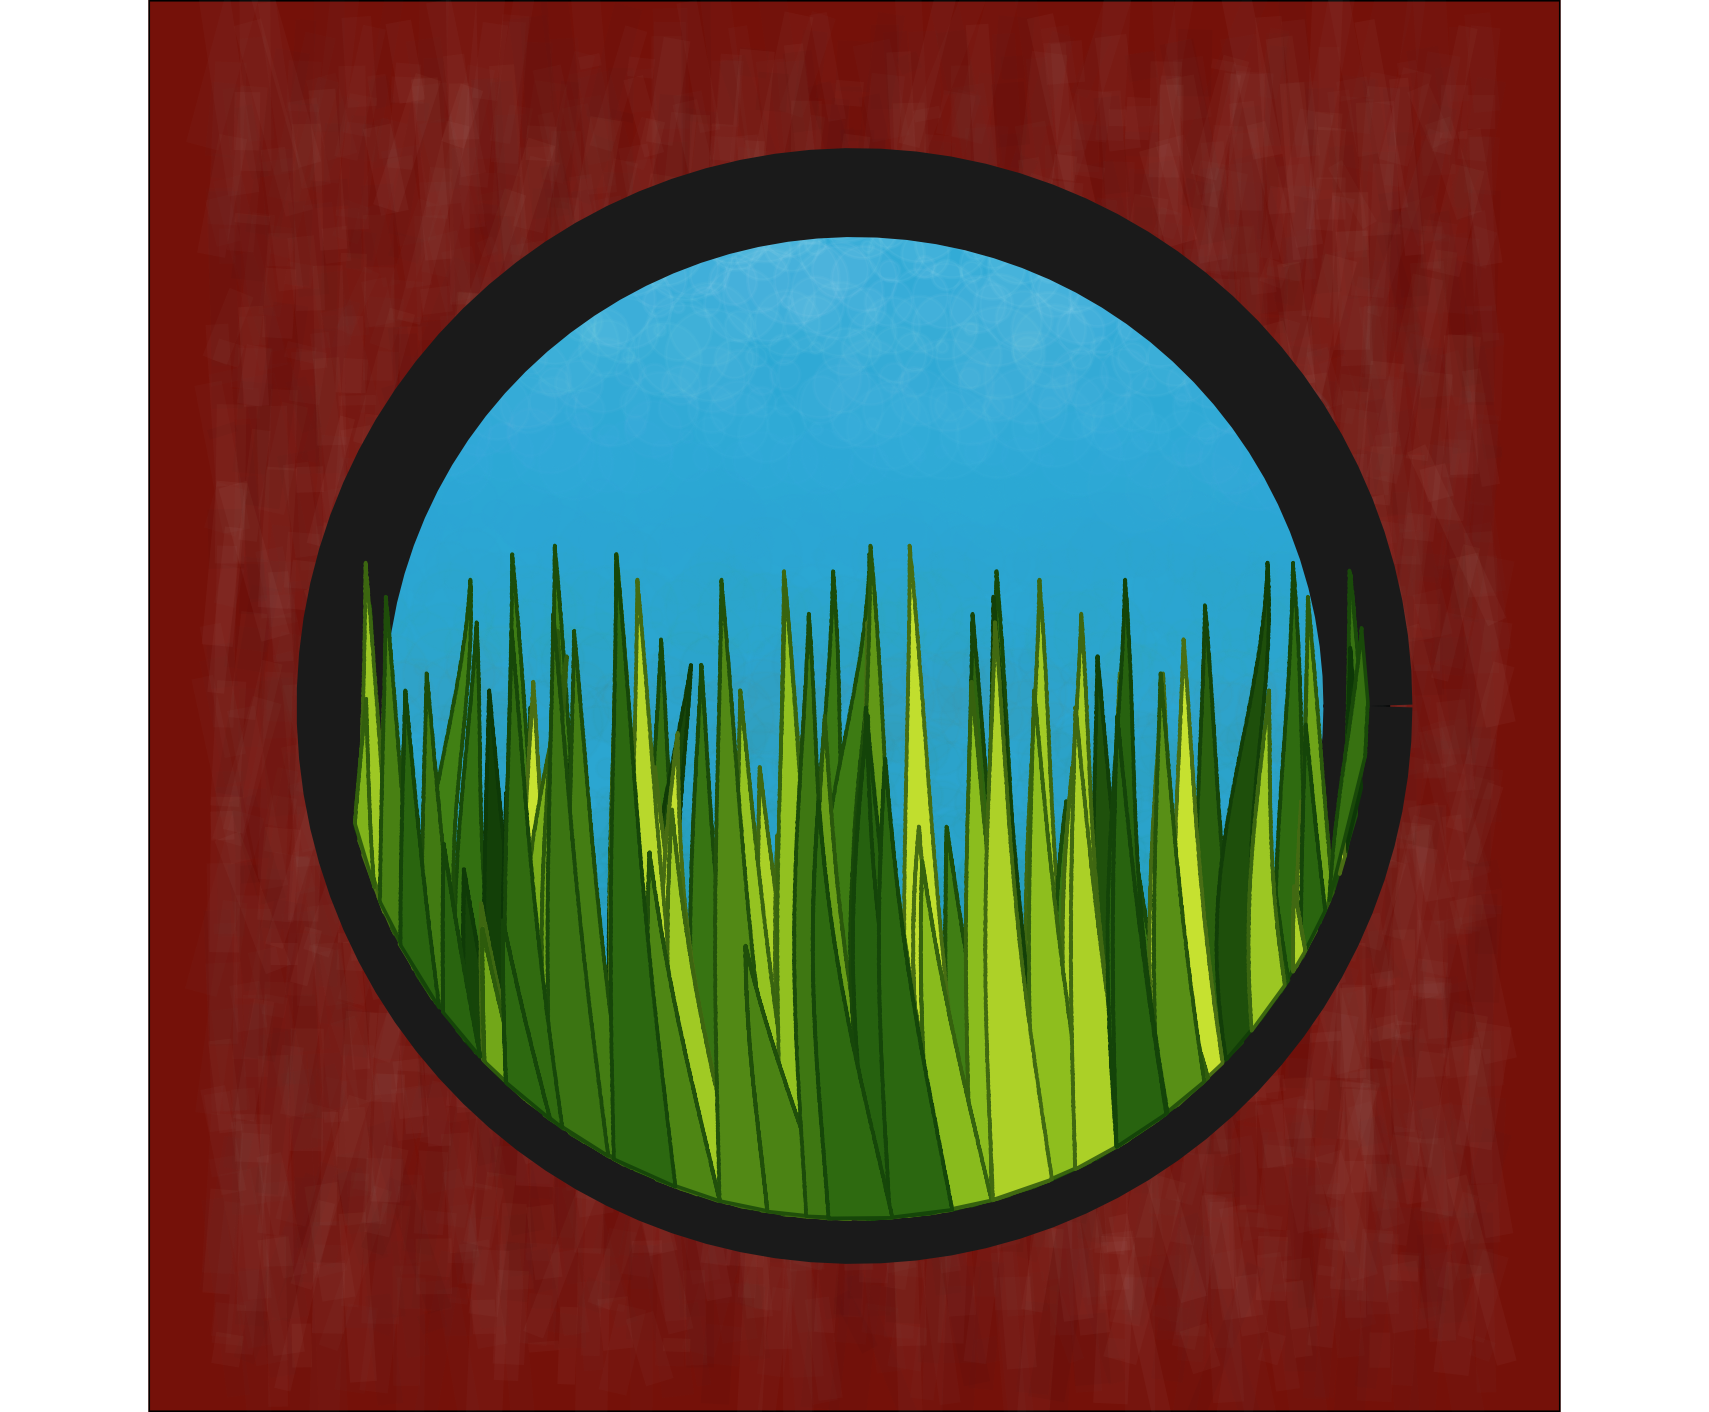 An image of grass blades up close outside with a sky and some clouds within a black circular frame in the center. The background is a patterned red color.